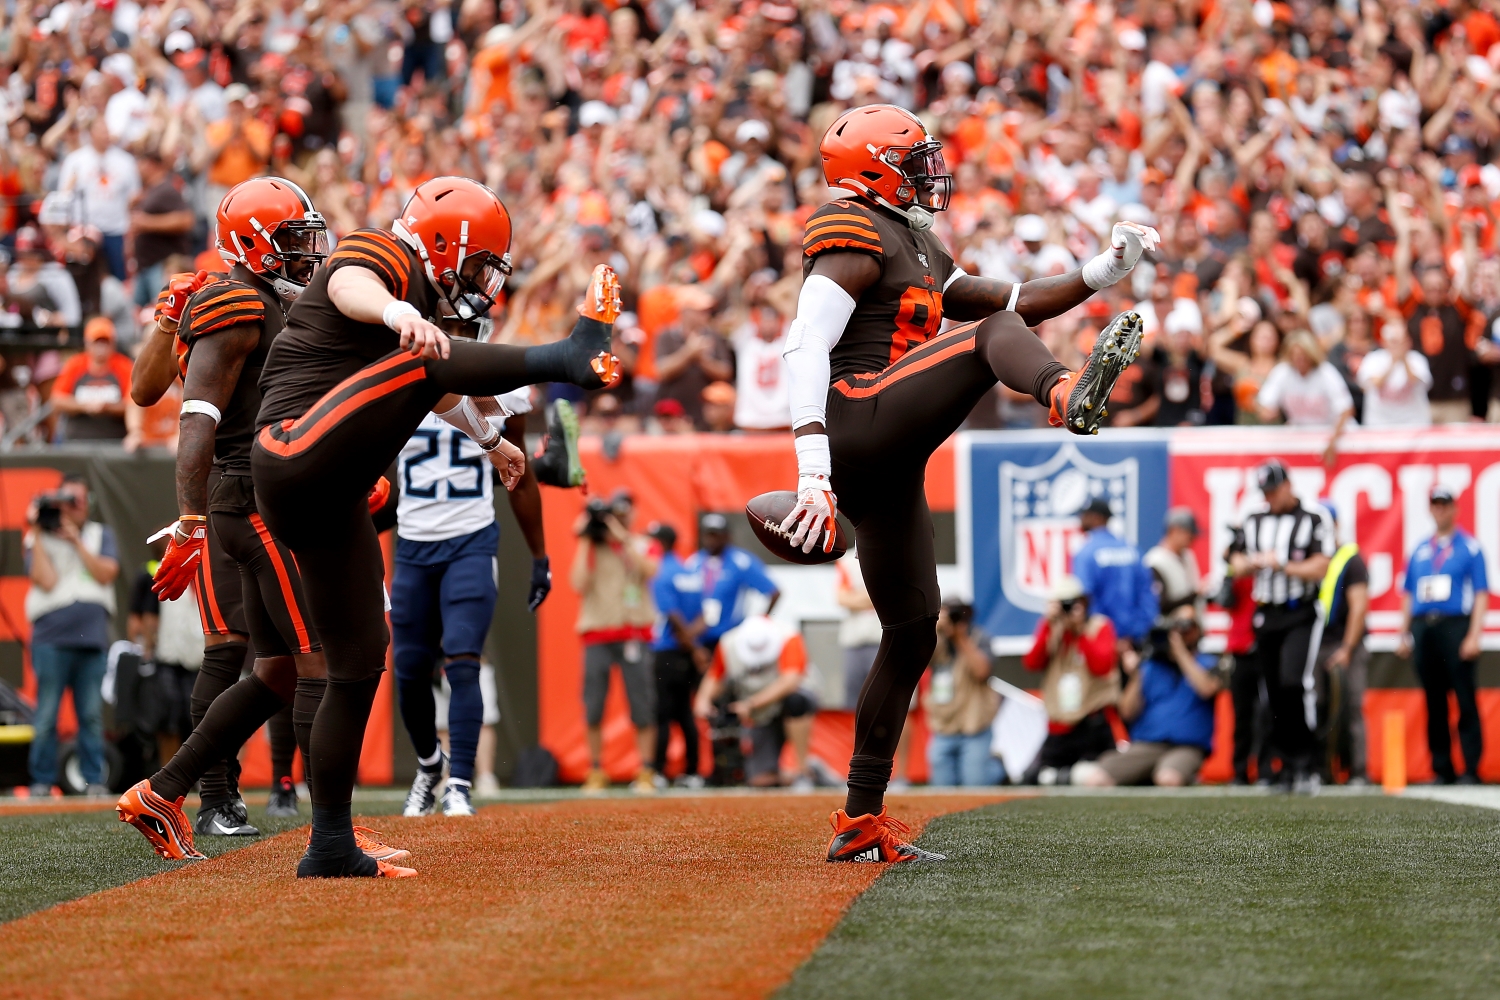 Cleveland Browns players David Njoku and Baker Mayfield celebrate scoring a touchdown.